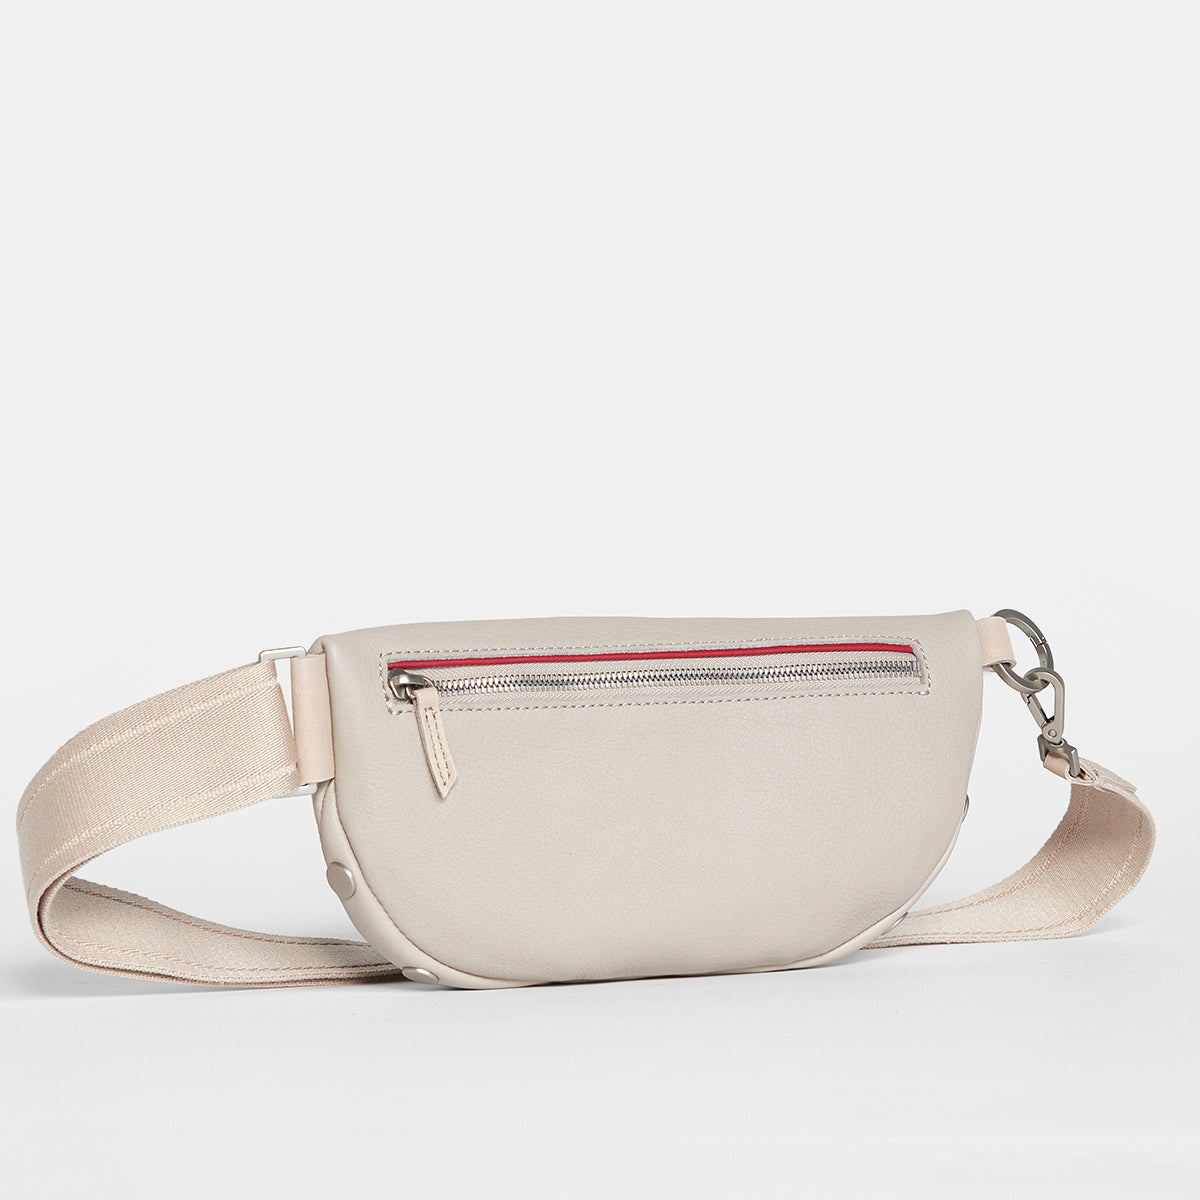 Charles-Crossbody-Paved-Grey-Detail-View